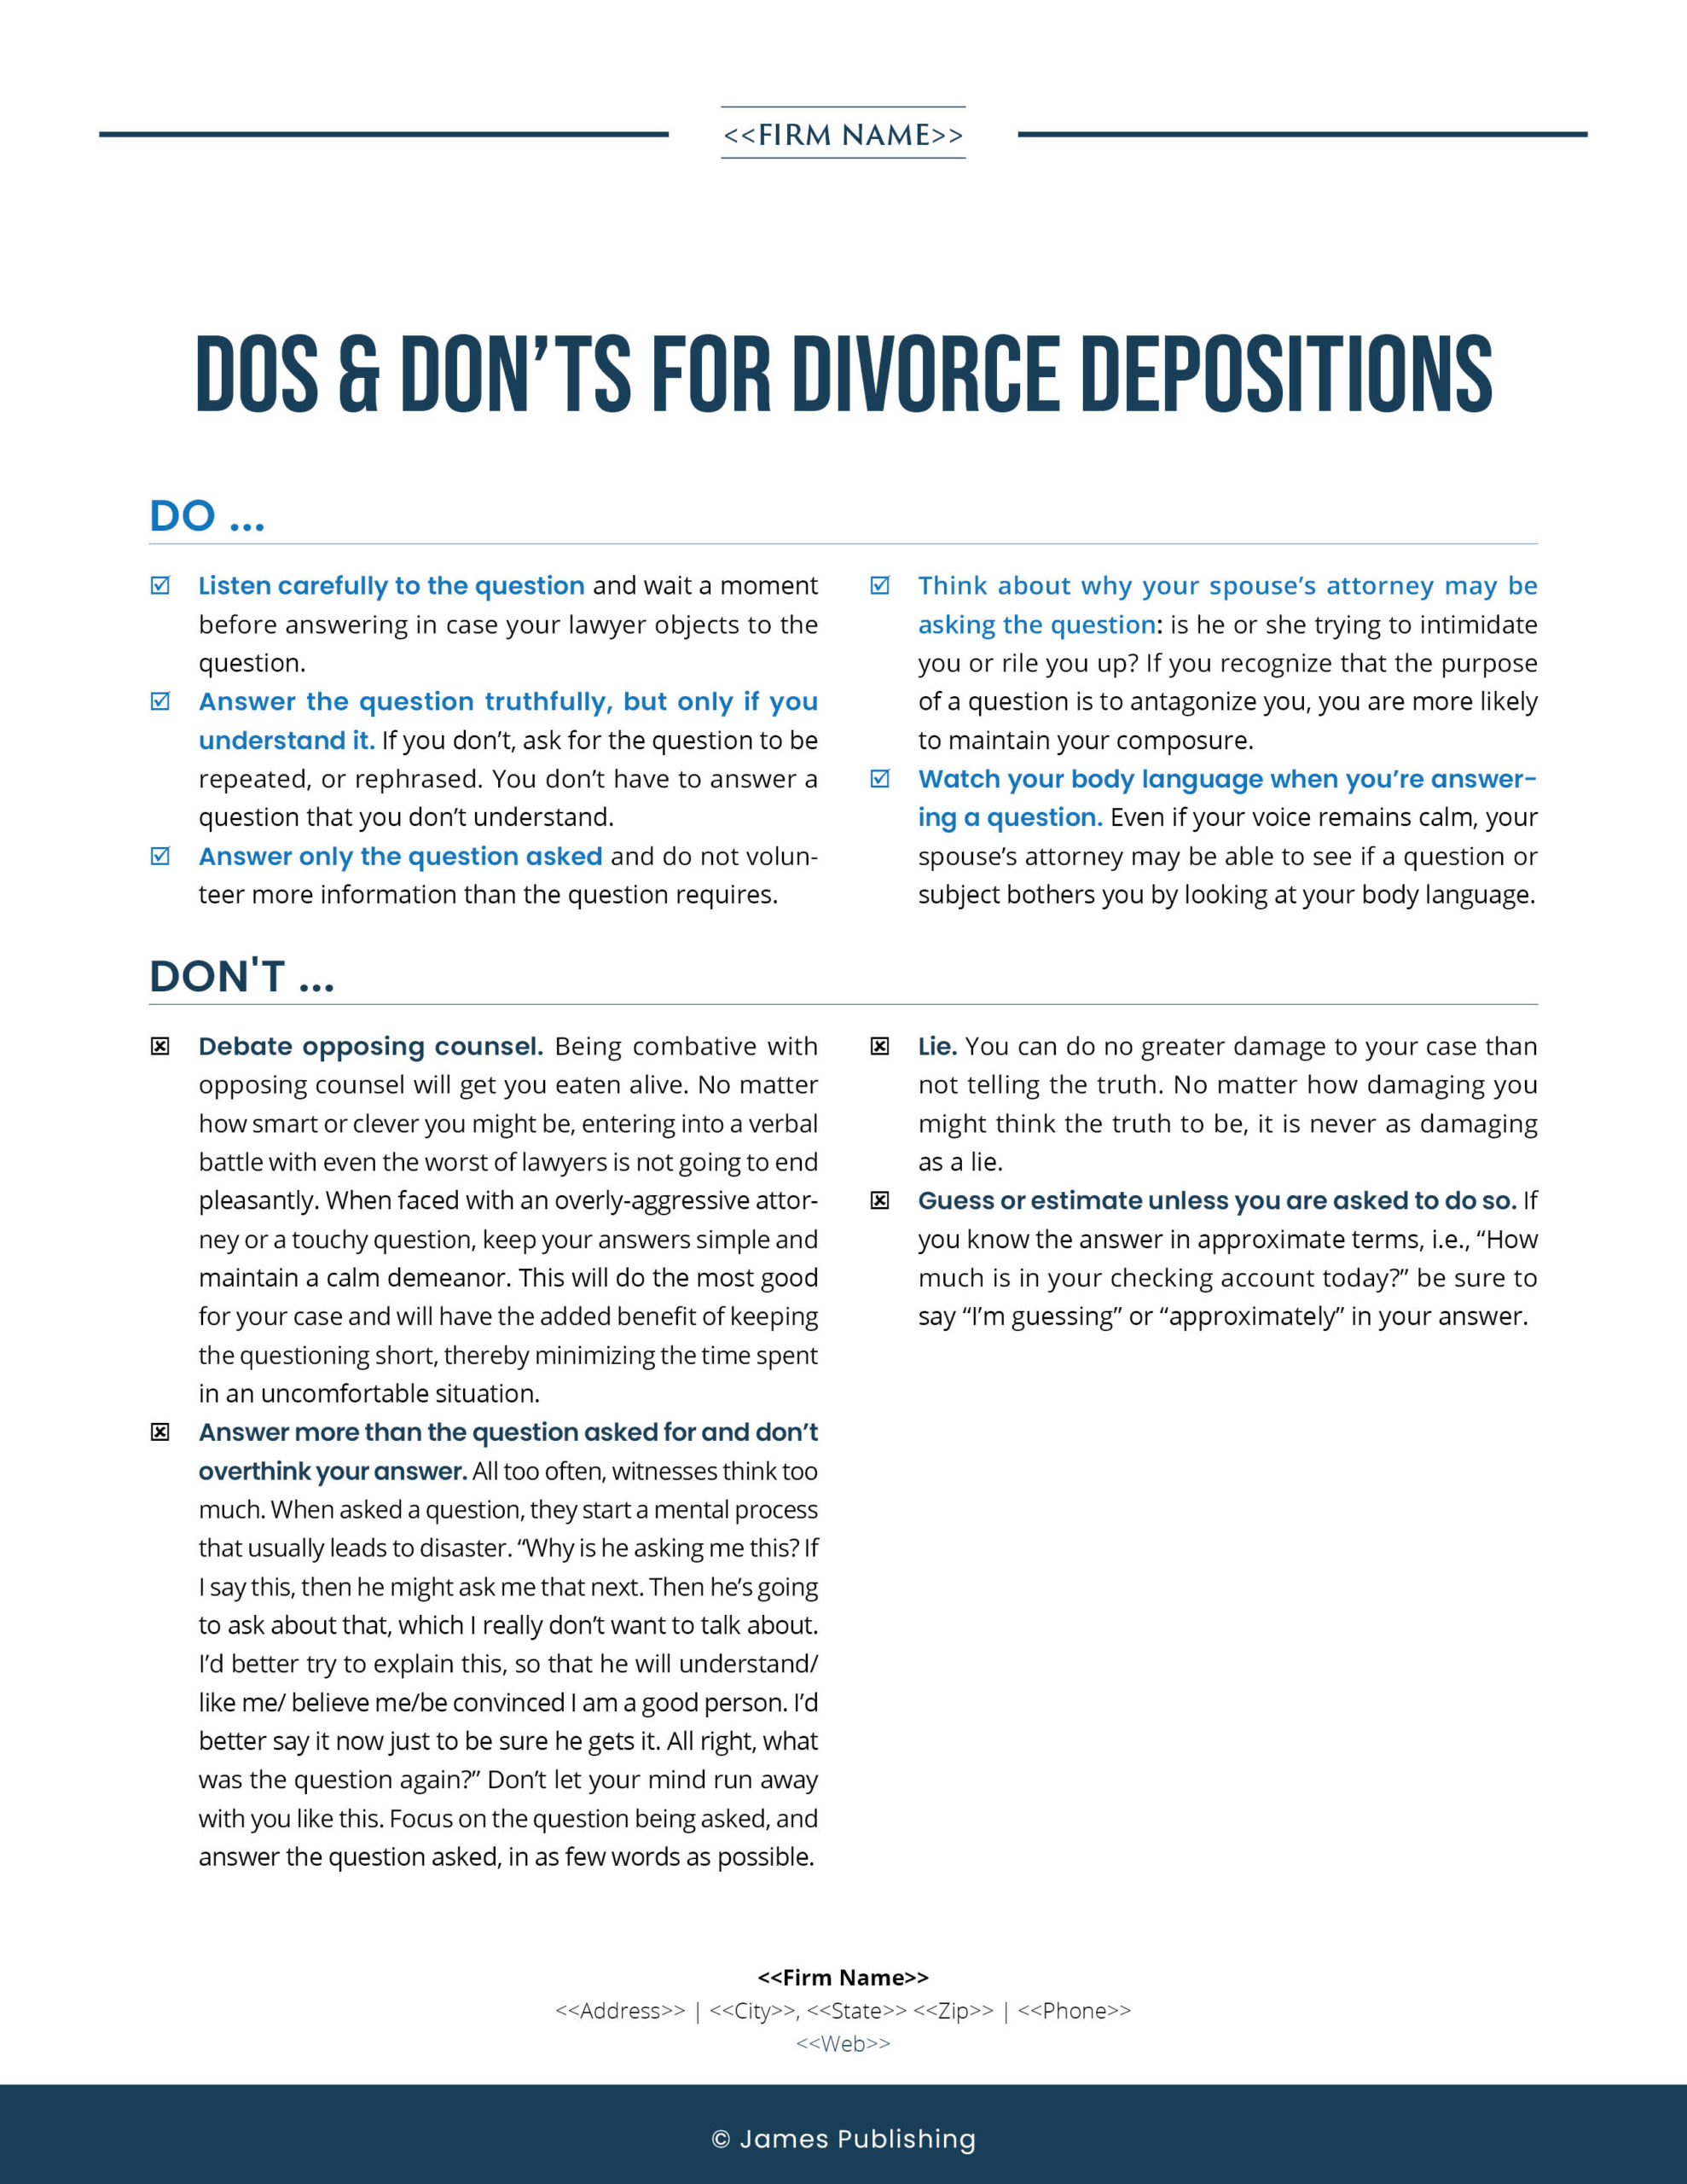 FAM-21 Dos and Don'ts for Divorce Depositions